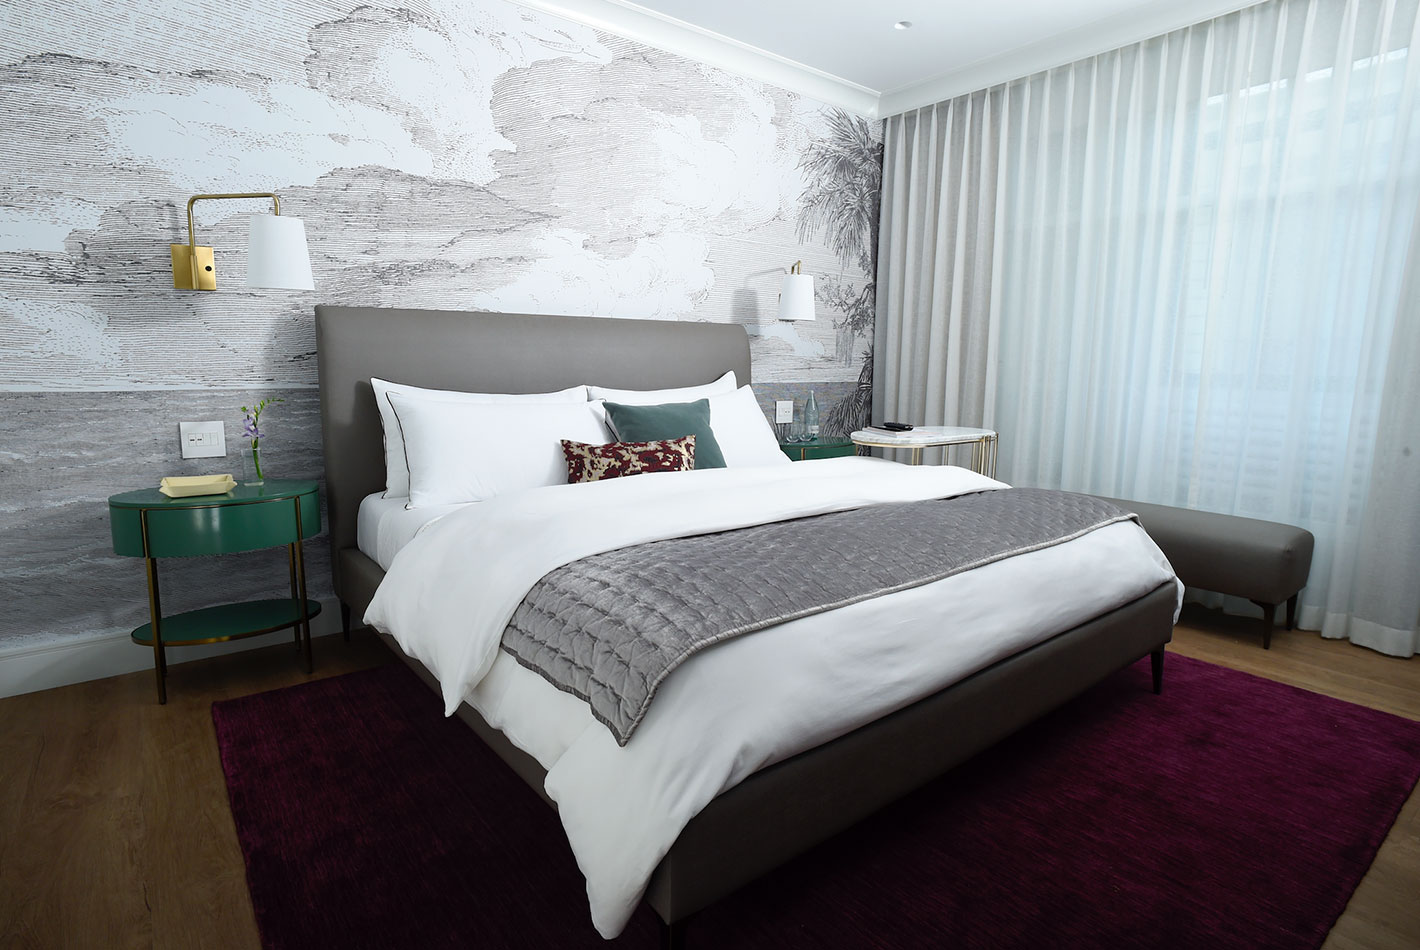 Stylish wallpaper hangs behind a king-sized bed in a West Elm Hotel model room. A rich cranberry carpet and white curtains complete the space.